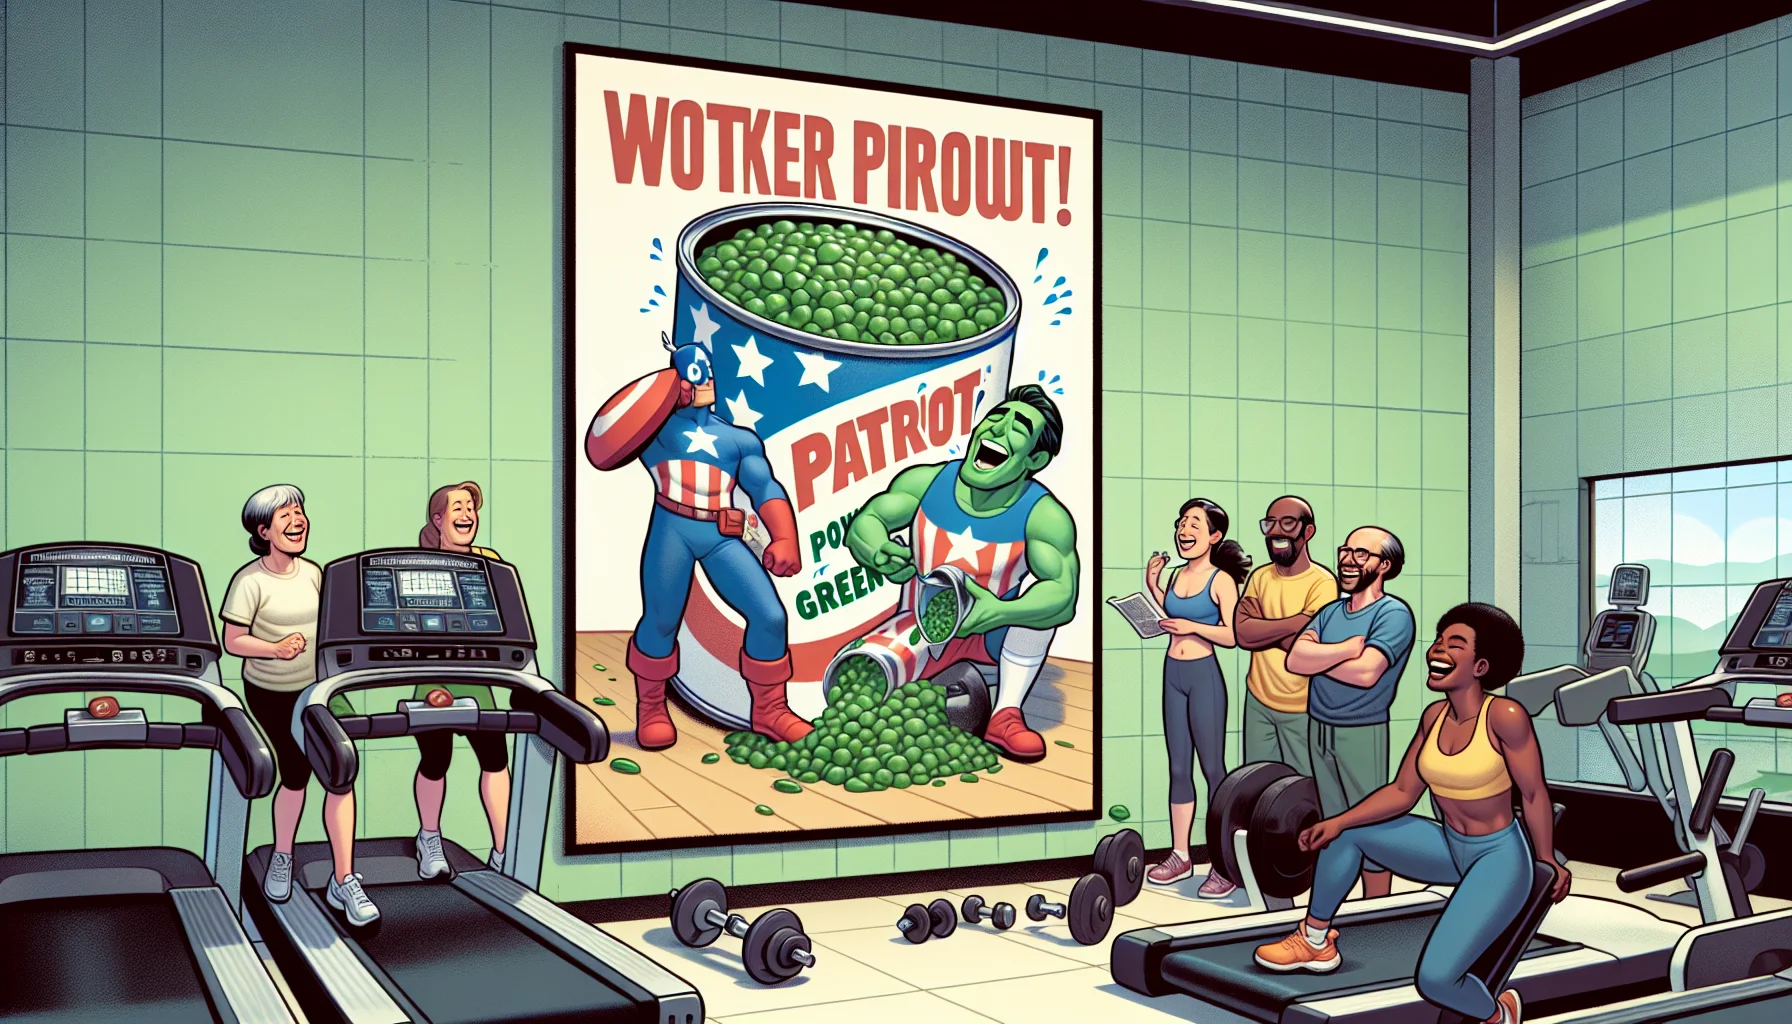 Imagine a humorously illustrated scene in a gym environment. The focus of the scene is a large, eye-catching poster on the wall. The poster shows a cartoon-like character, possibly a superhero, ironically struggling with a can of green vegetables, symbolizing 'Patriot Power Greens'. The character is sweating but smiling, suggesting the consumption of greens is a 'workout'. Nearby, diverse gym-goers, such as a middle-aged Caucasian woman on a treadmill, a young Hispanic man lifting weights, and a Black woman doing yoga, laugh at the poster, appearing more enthusiastic about their own less daunting workouts.